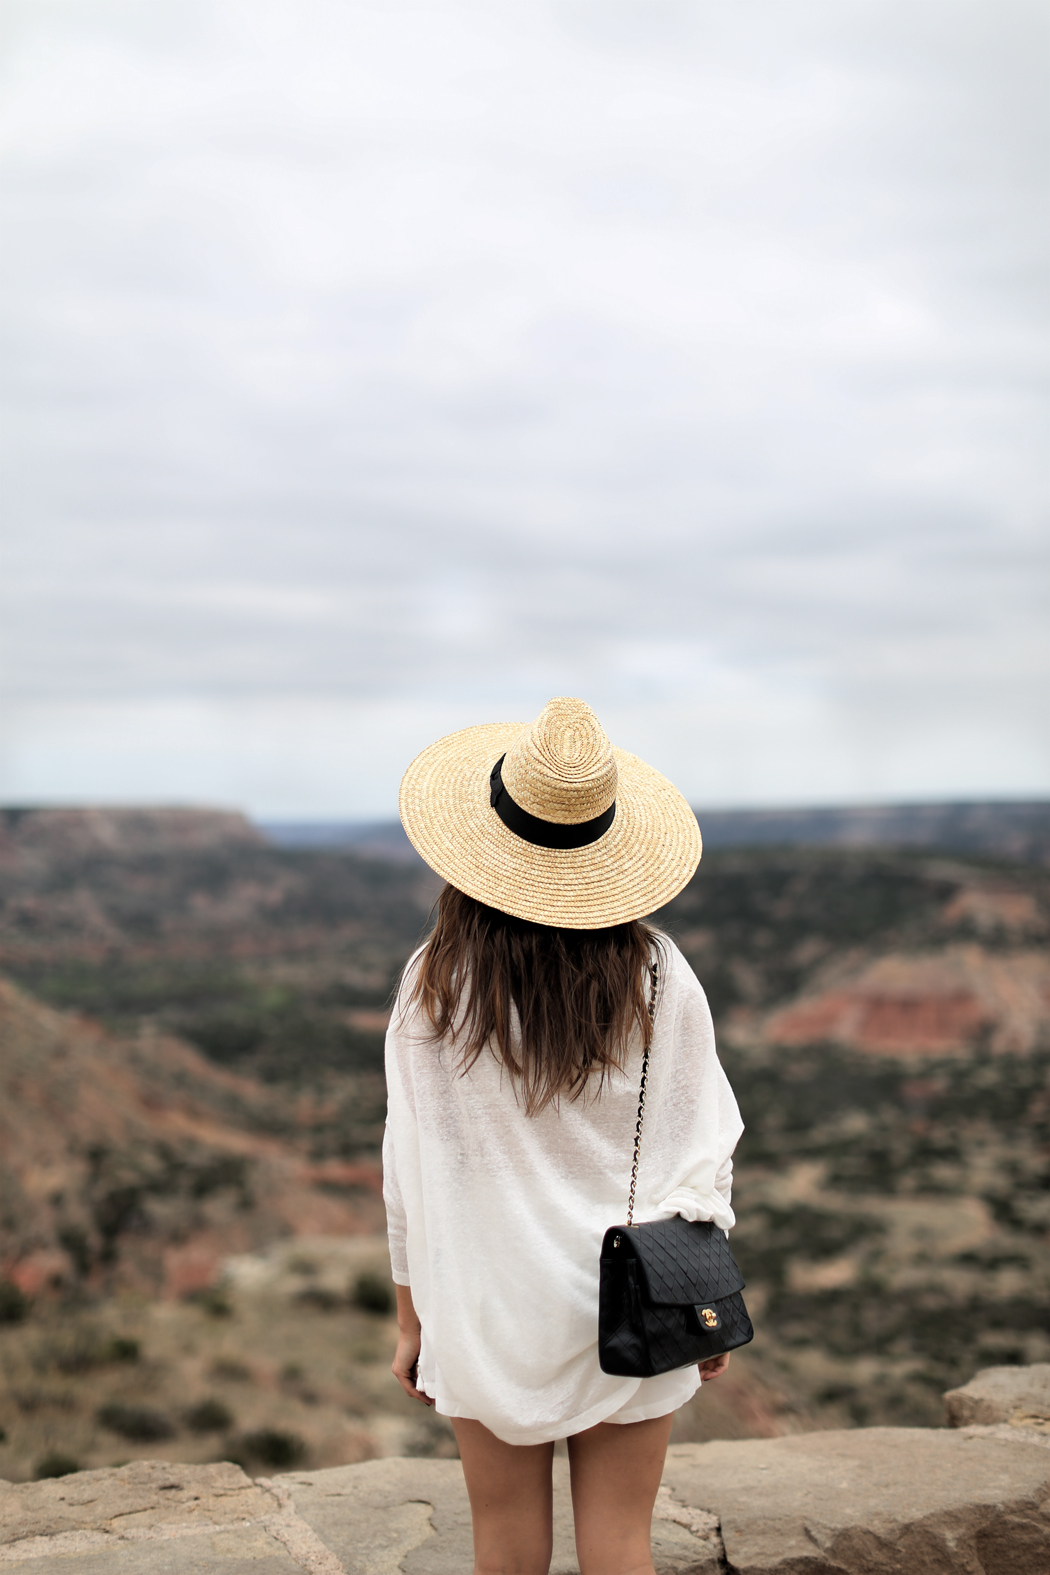 Palo Duro Canyon Outfit Blog